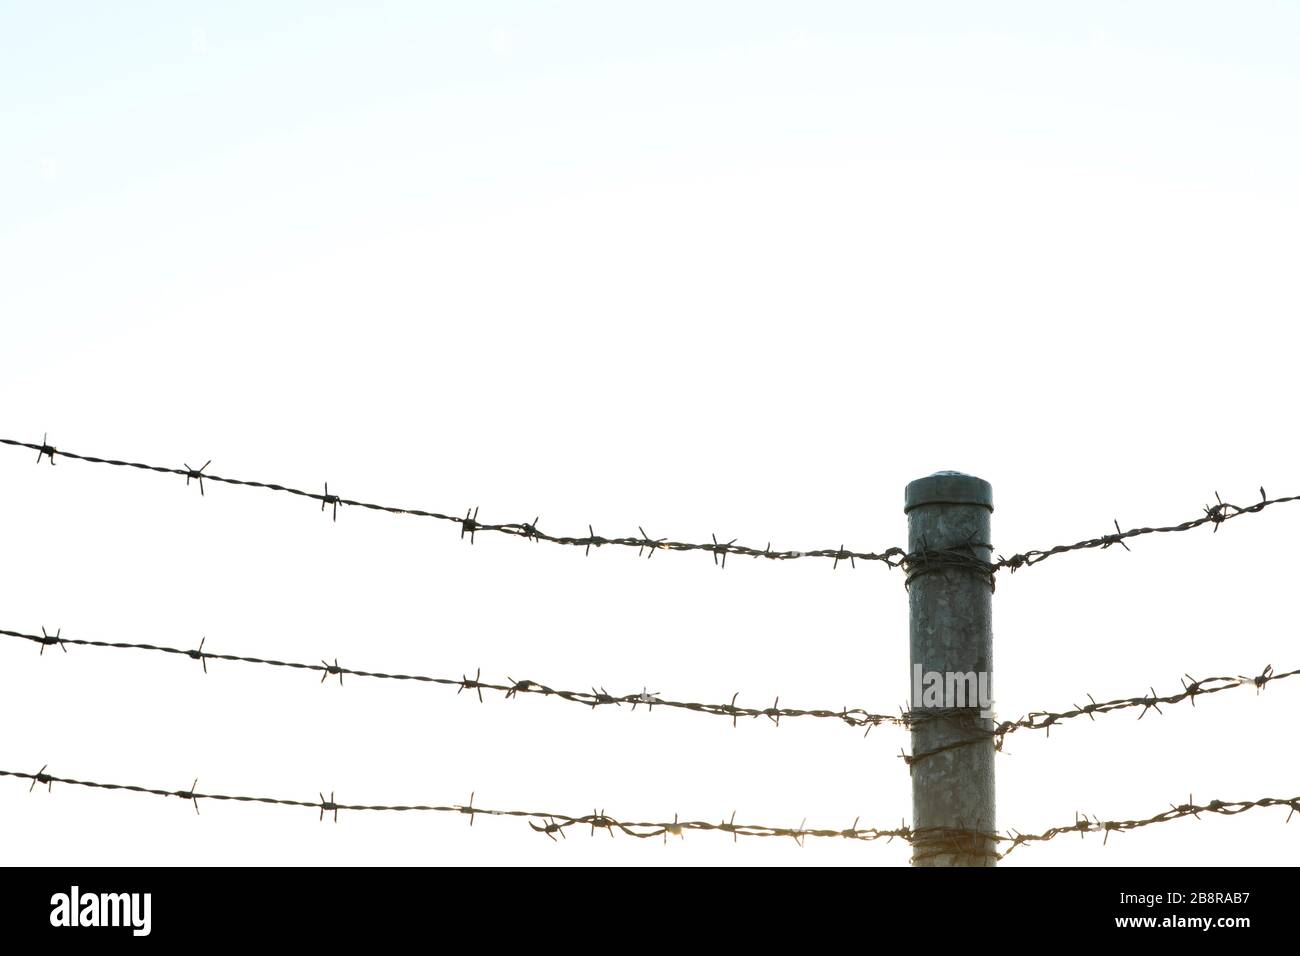 three lines of sharp barbed barb wire security fencing converging on a post. large void for text or cropping. Stock Photo